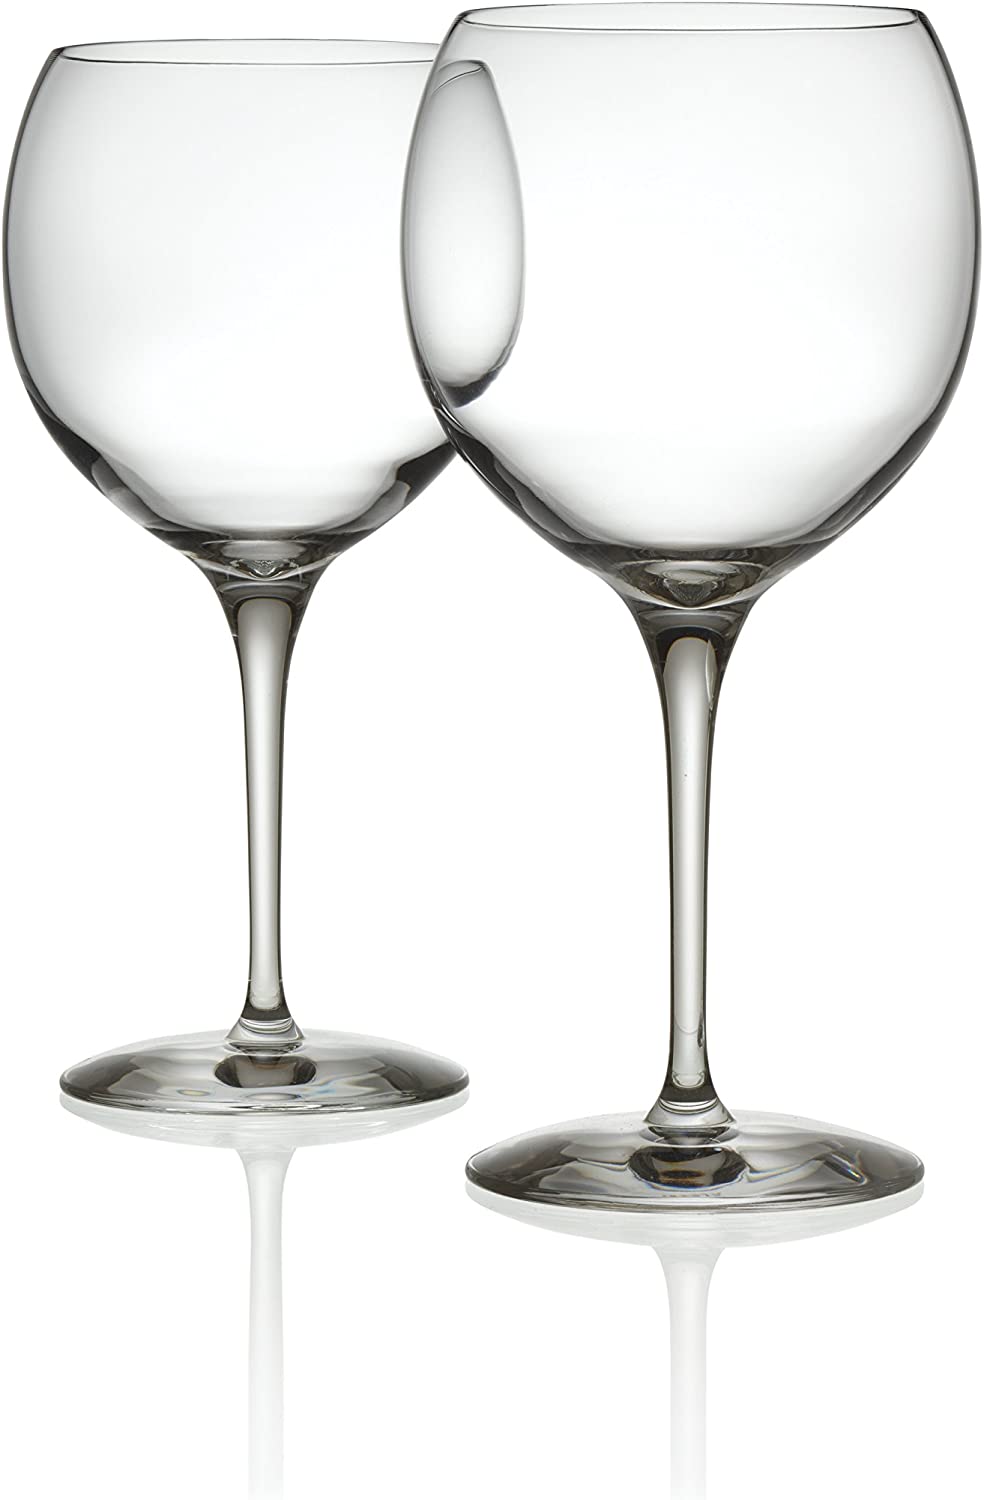 Alessi Mami Xl Red Wine Glass, Set of 2, Transparent